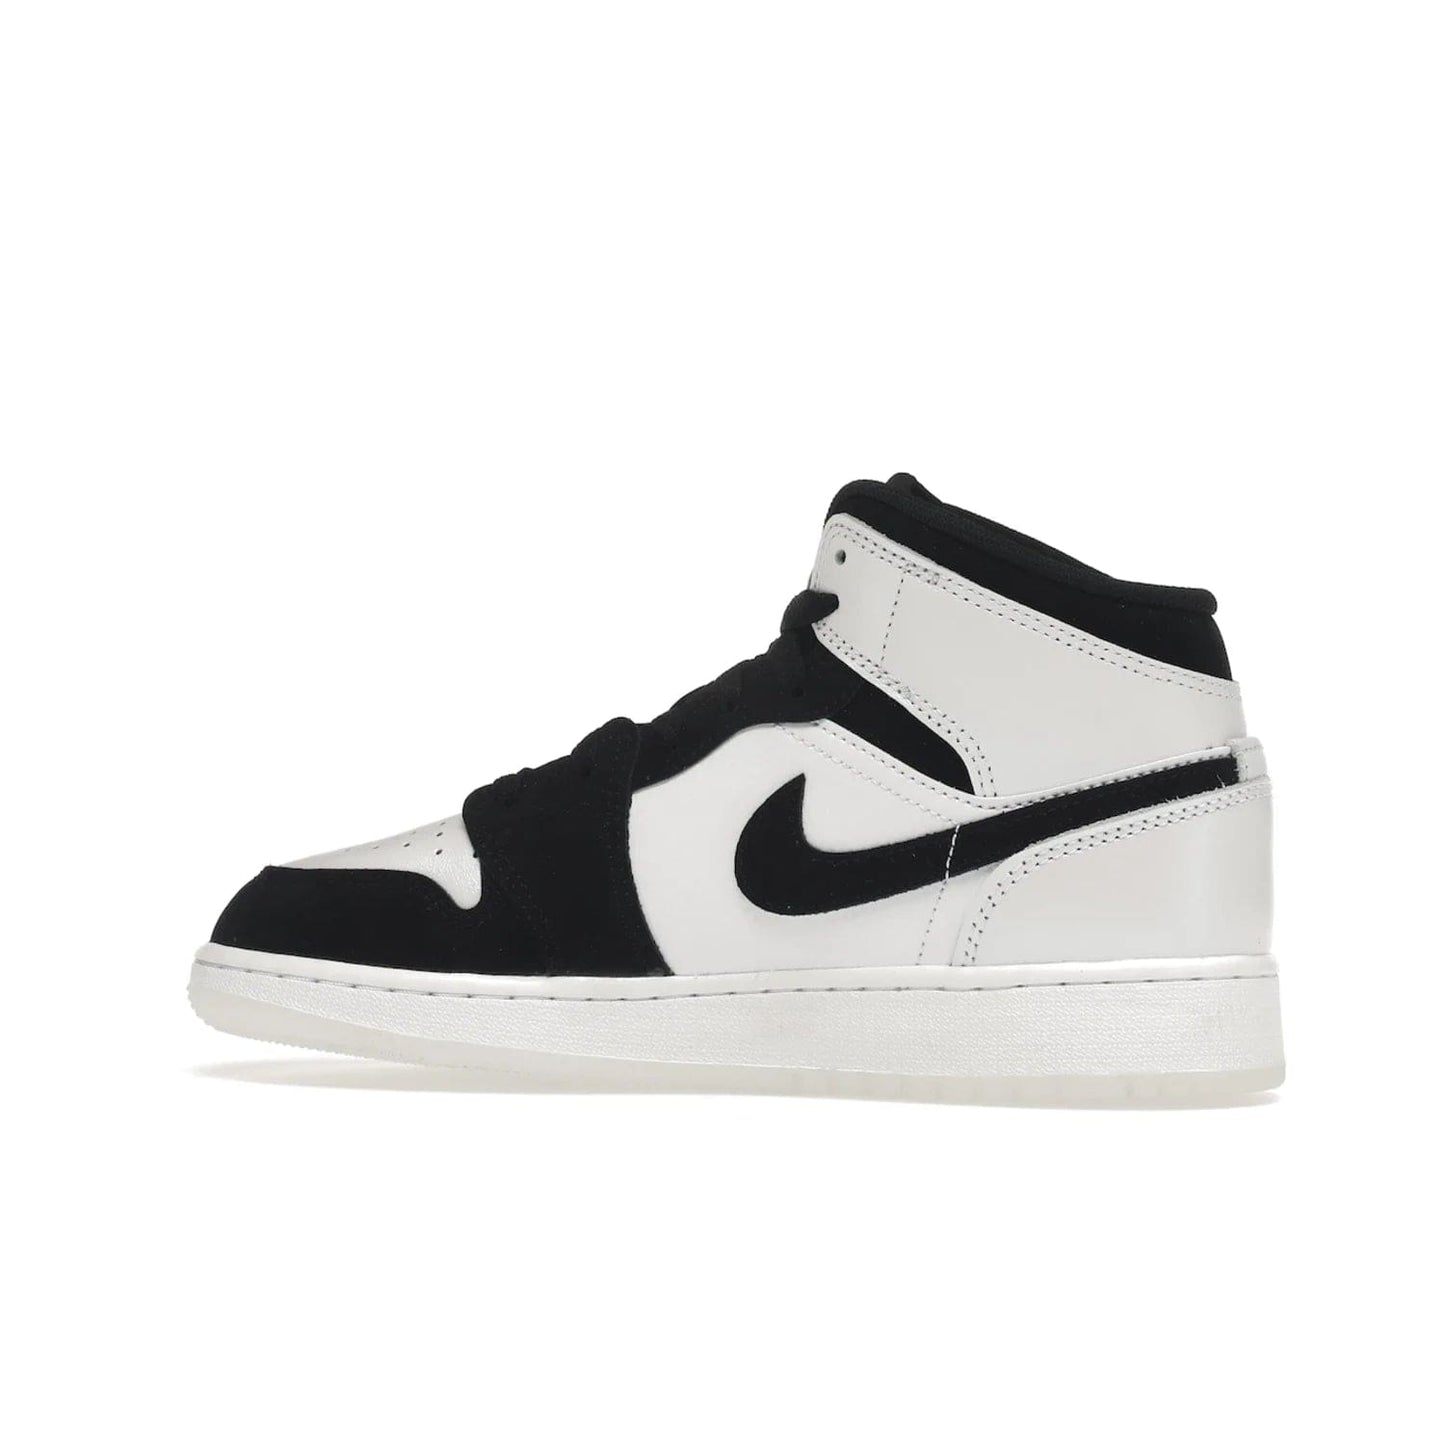 Jordan 1 Mid Diamond Shorts (GS) - Image 21 - Only at www.BallersClubKickz.com - Get the Jordan 1 Mid Diamond Shorts GS on 9th Feb 2022! Features a white, black & suede design with nylon tongue, stamped wings logo, rubber midsole & outsole. Only $100!